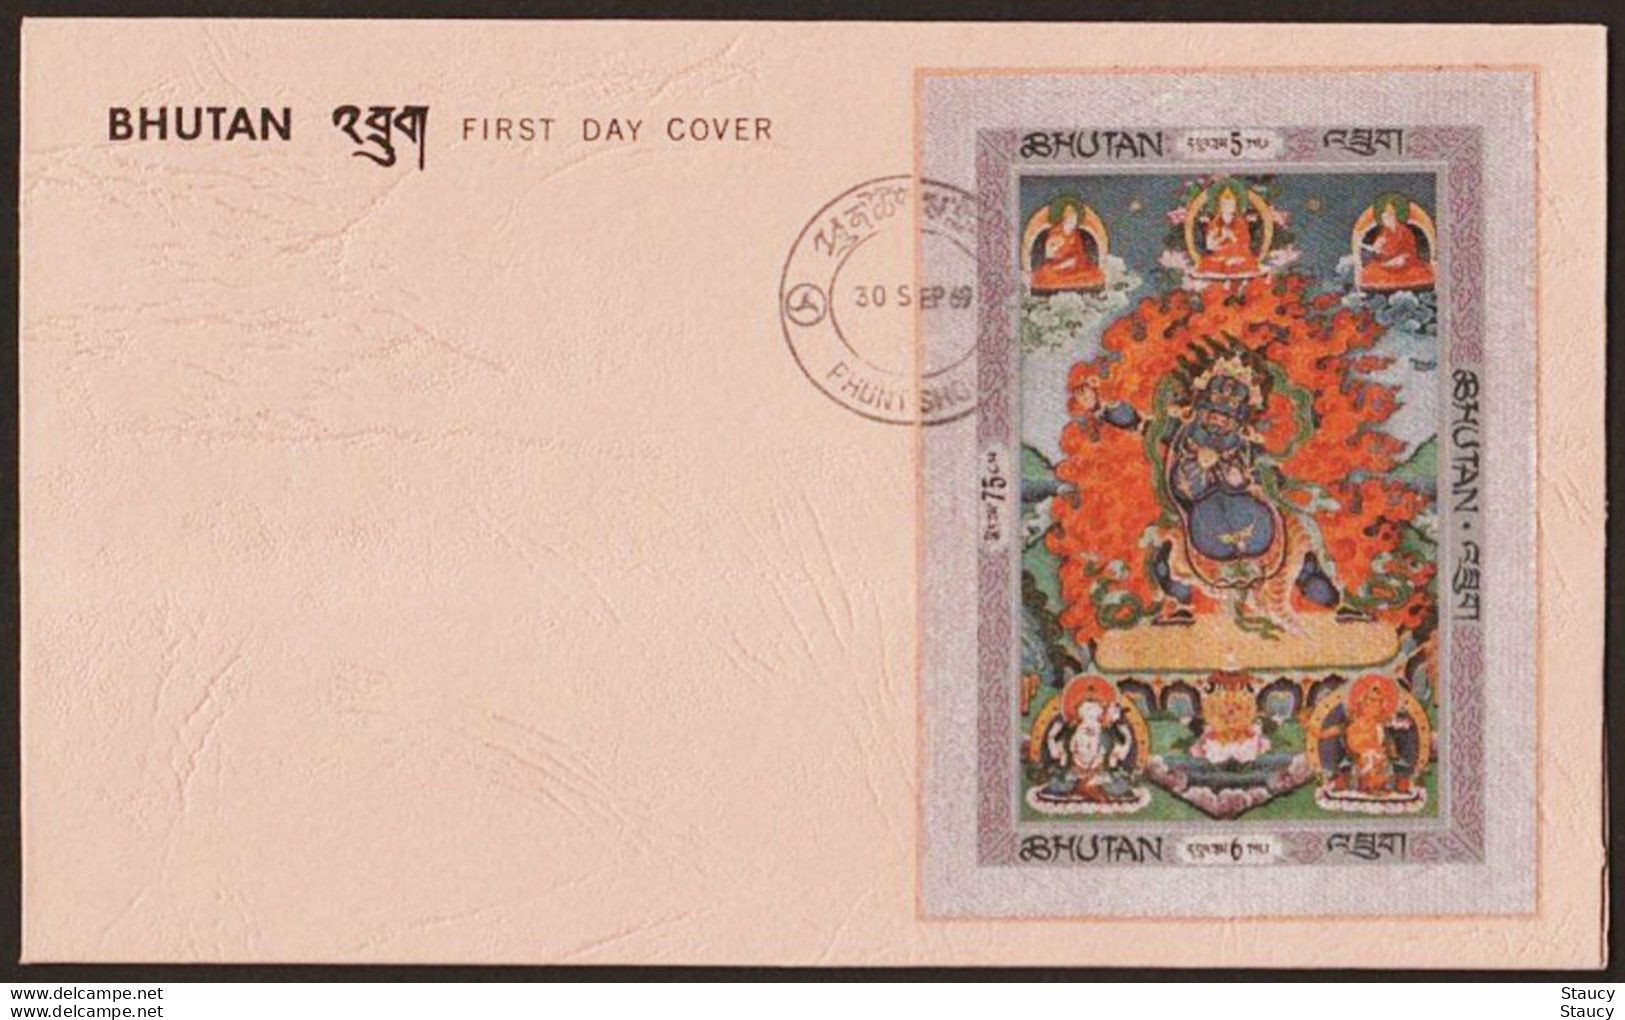 BHUTAN 1969 "Imperf" RELIGIOUS THANKA PAINTINGS BUDHA - SILK CLOTH Unique 3v Stamps "Imperf" SS On FDC, As Per Scan - Fouten Op Zegels